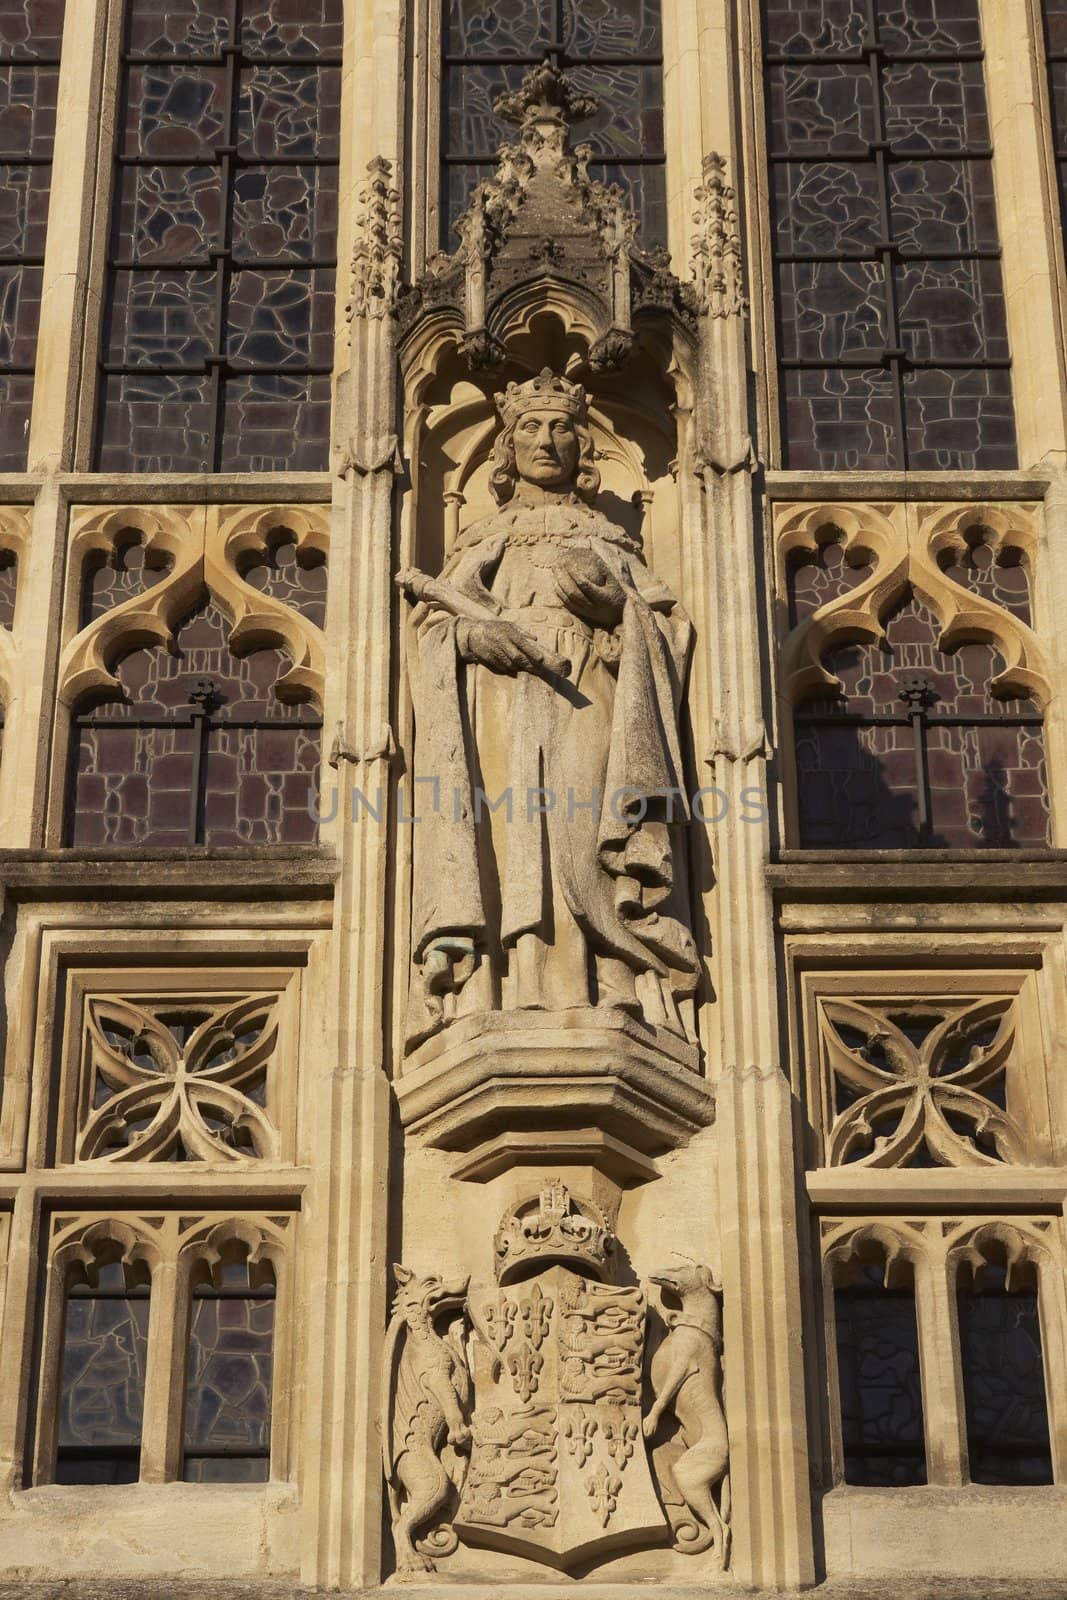 Religious statue decorating historic Bath Abbey in Bath, Somerset, England. Historic Georgian style building built of traditional honey colored sandstone.